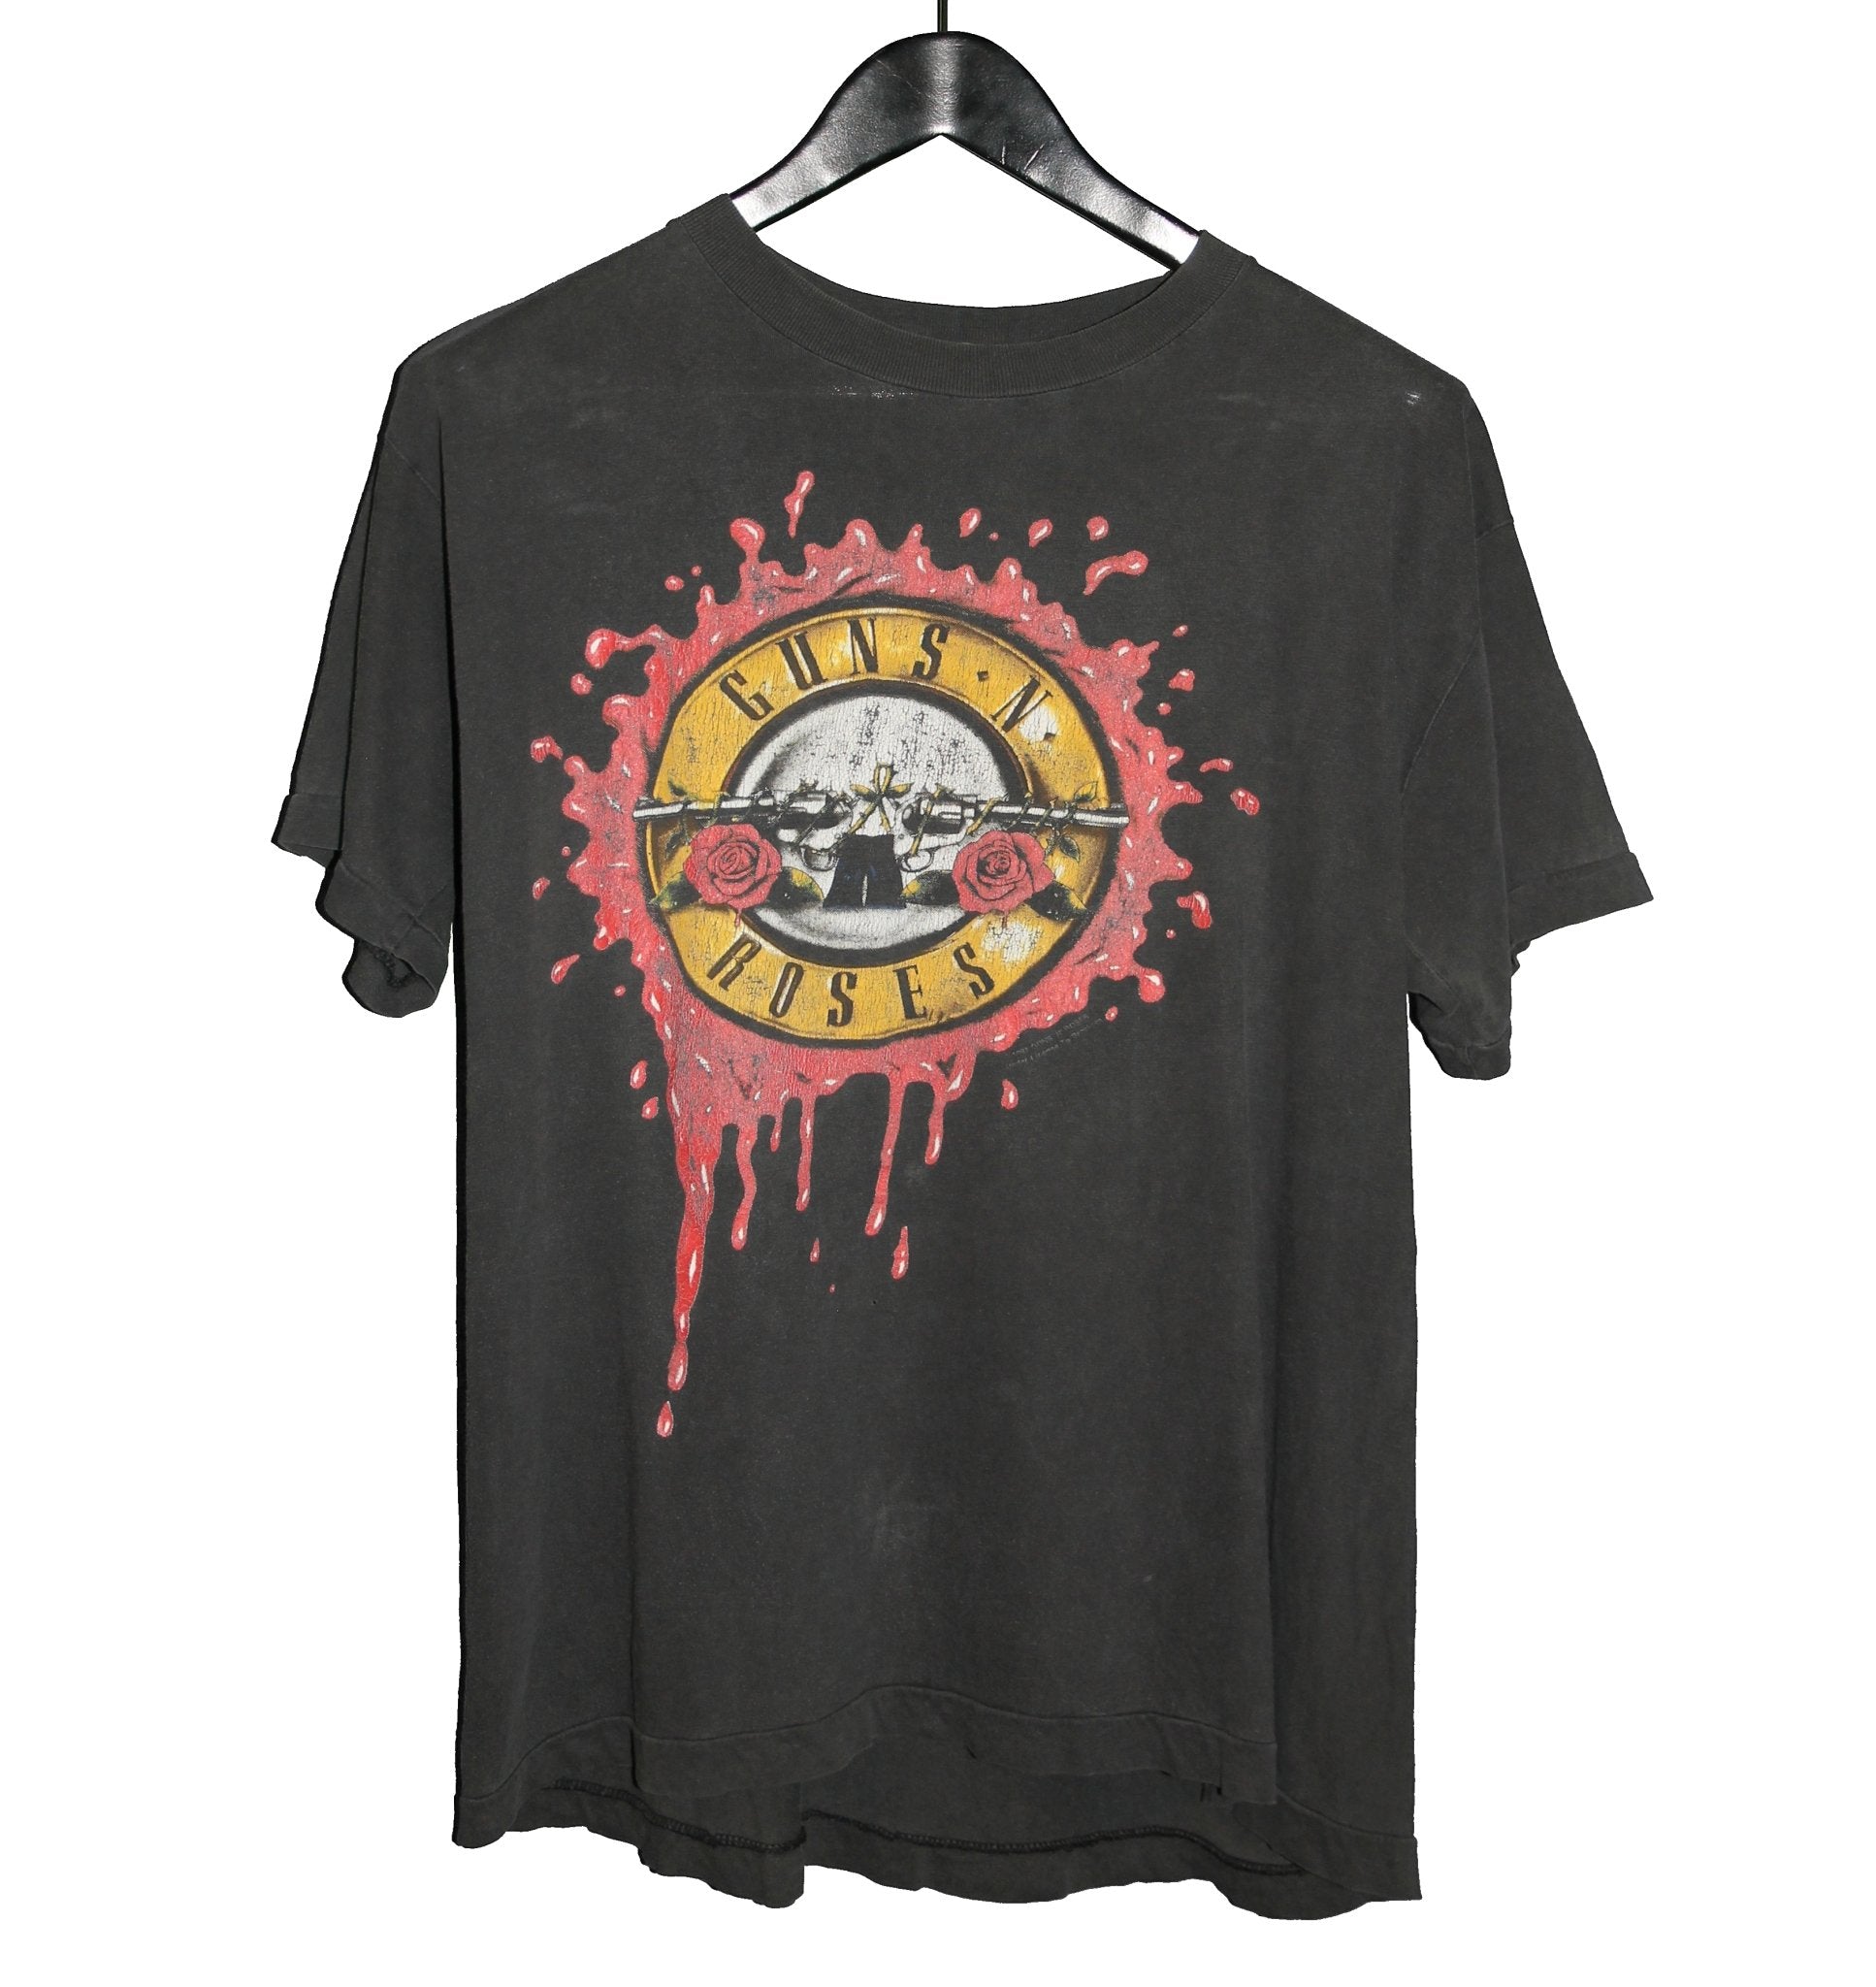 Guns N Roses 1991/92 Get in the Ring Tour Shirt - Faded AU